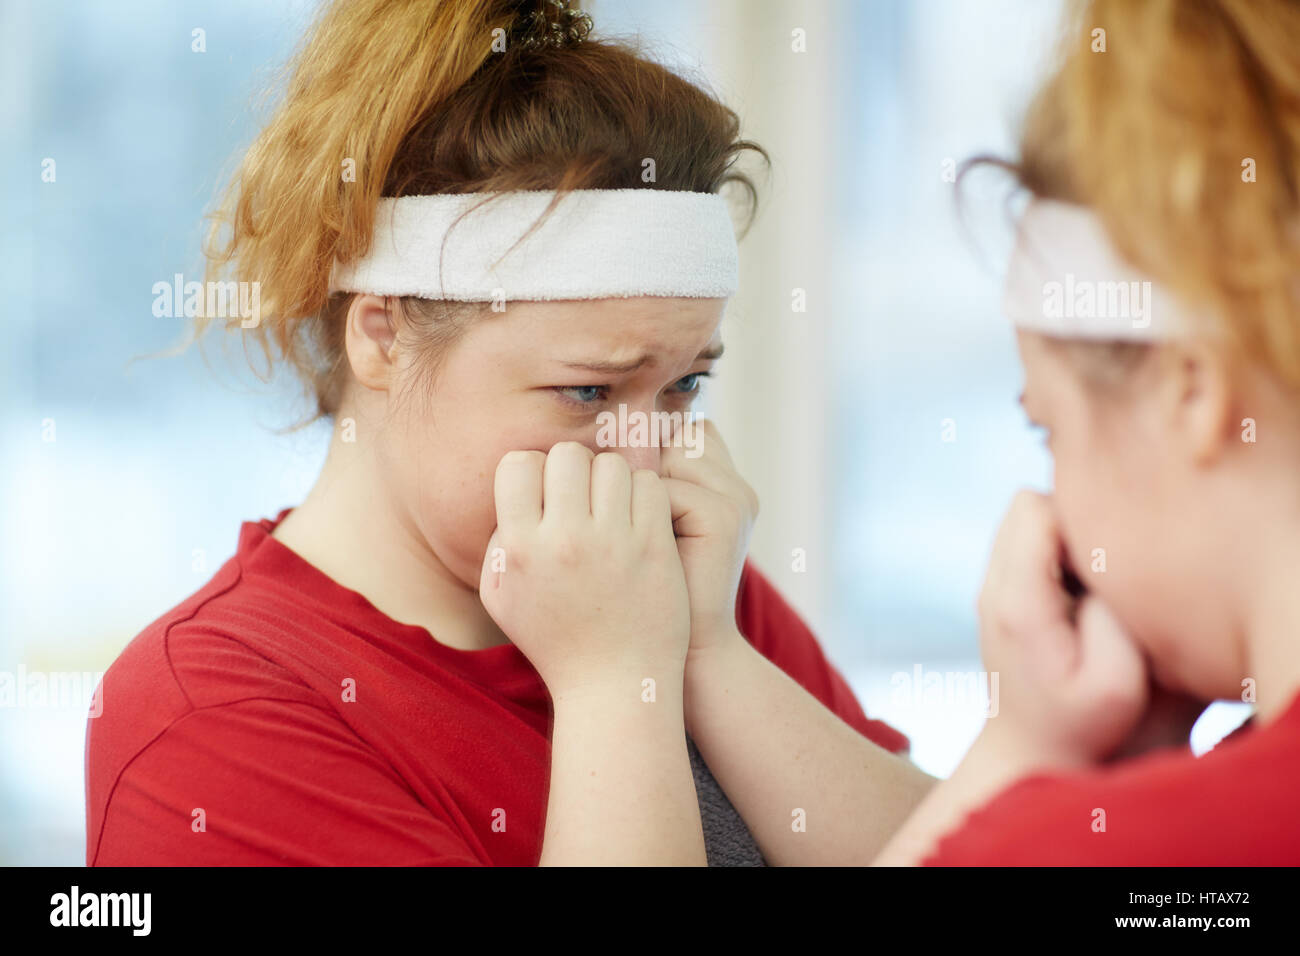 Portrait of young overweight woman crying while looking in mirror, upset and dissatisfied with her body image Stock Photo